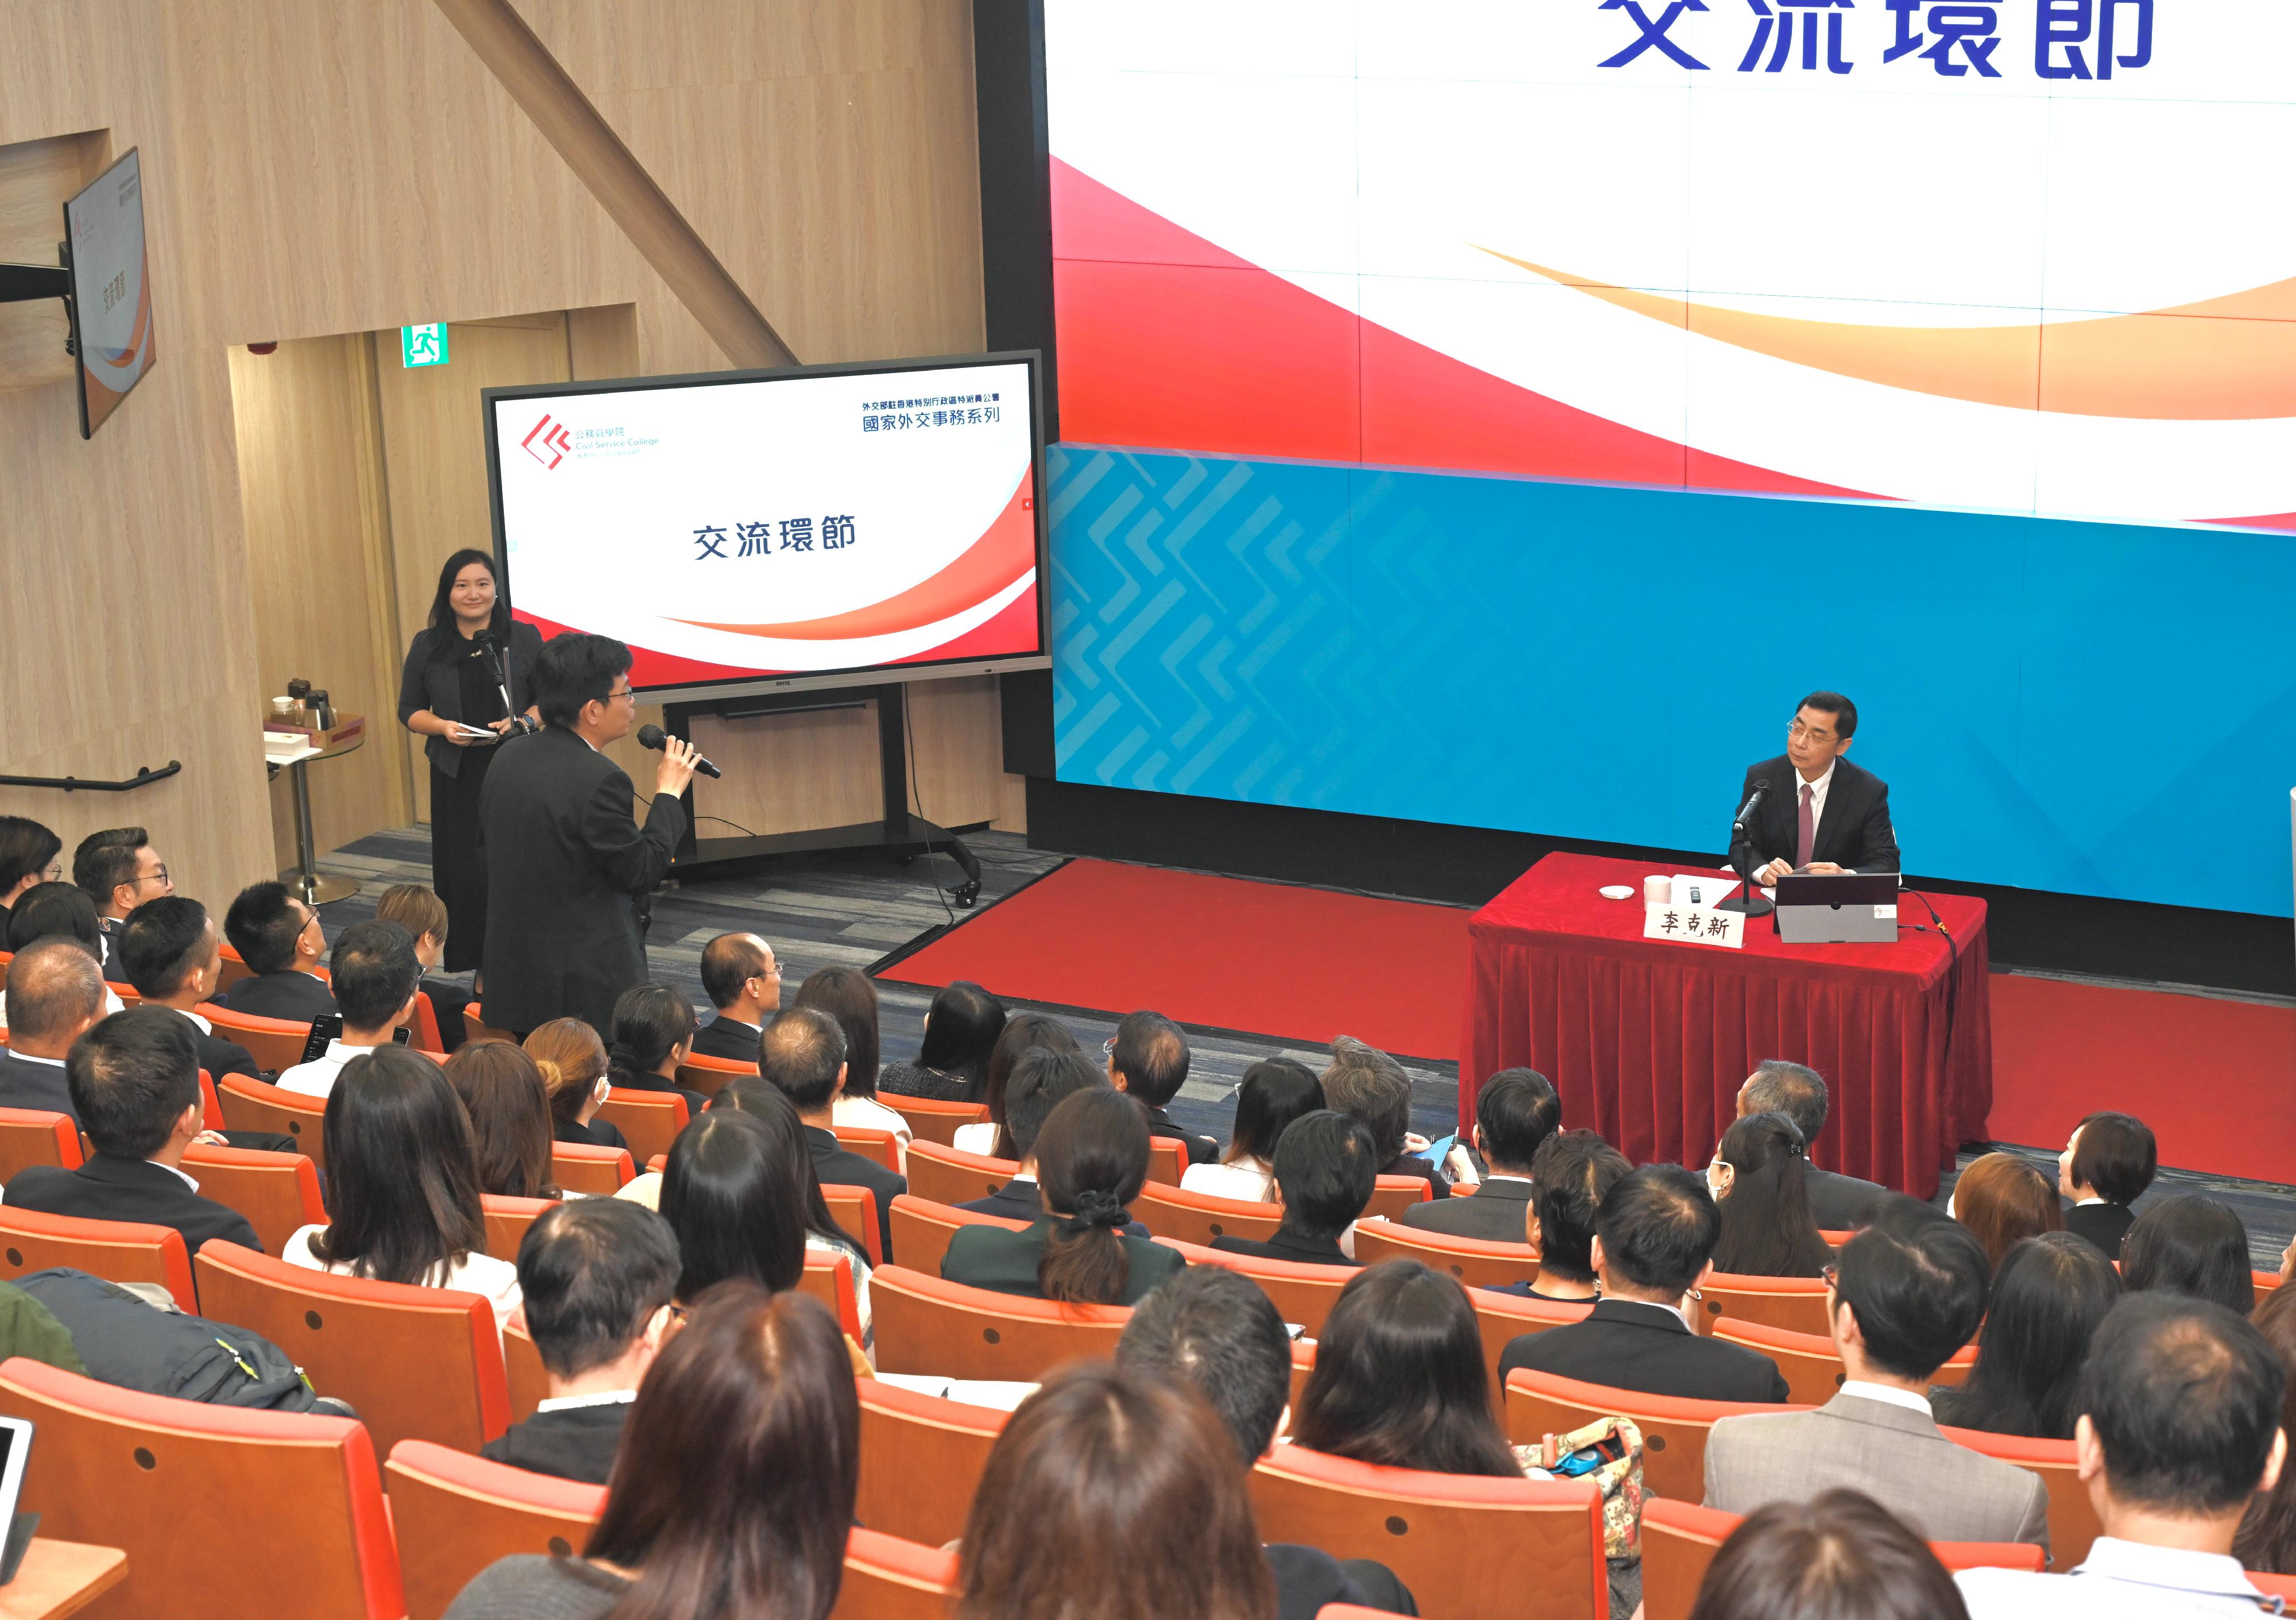 The Civil Service College today (November 29) held a talk of the series on the country's foreign affairs jointly with the Office of the Commissioner of the Ministry of Foreign Affairs in the Hong Kong Special Administrative Region on the topic of "The high-quality development of the Belt and Road Initiative and policy recommendations for Hong Kong's participation in the Initiative". Photo shows the speaker, the Director-General of the Department of International Economic Affairs of the Ministry of Foreign Affairs, Mr Li Kexin, receiving enquiries at the discussion session.